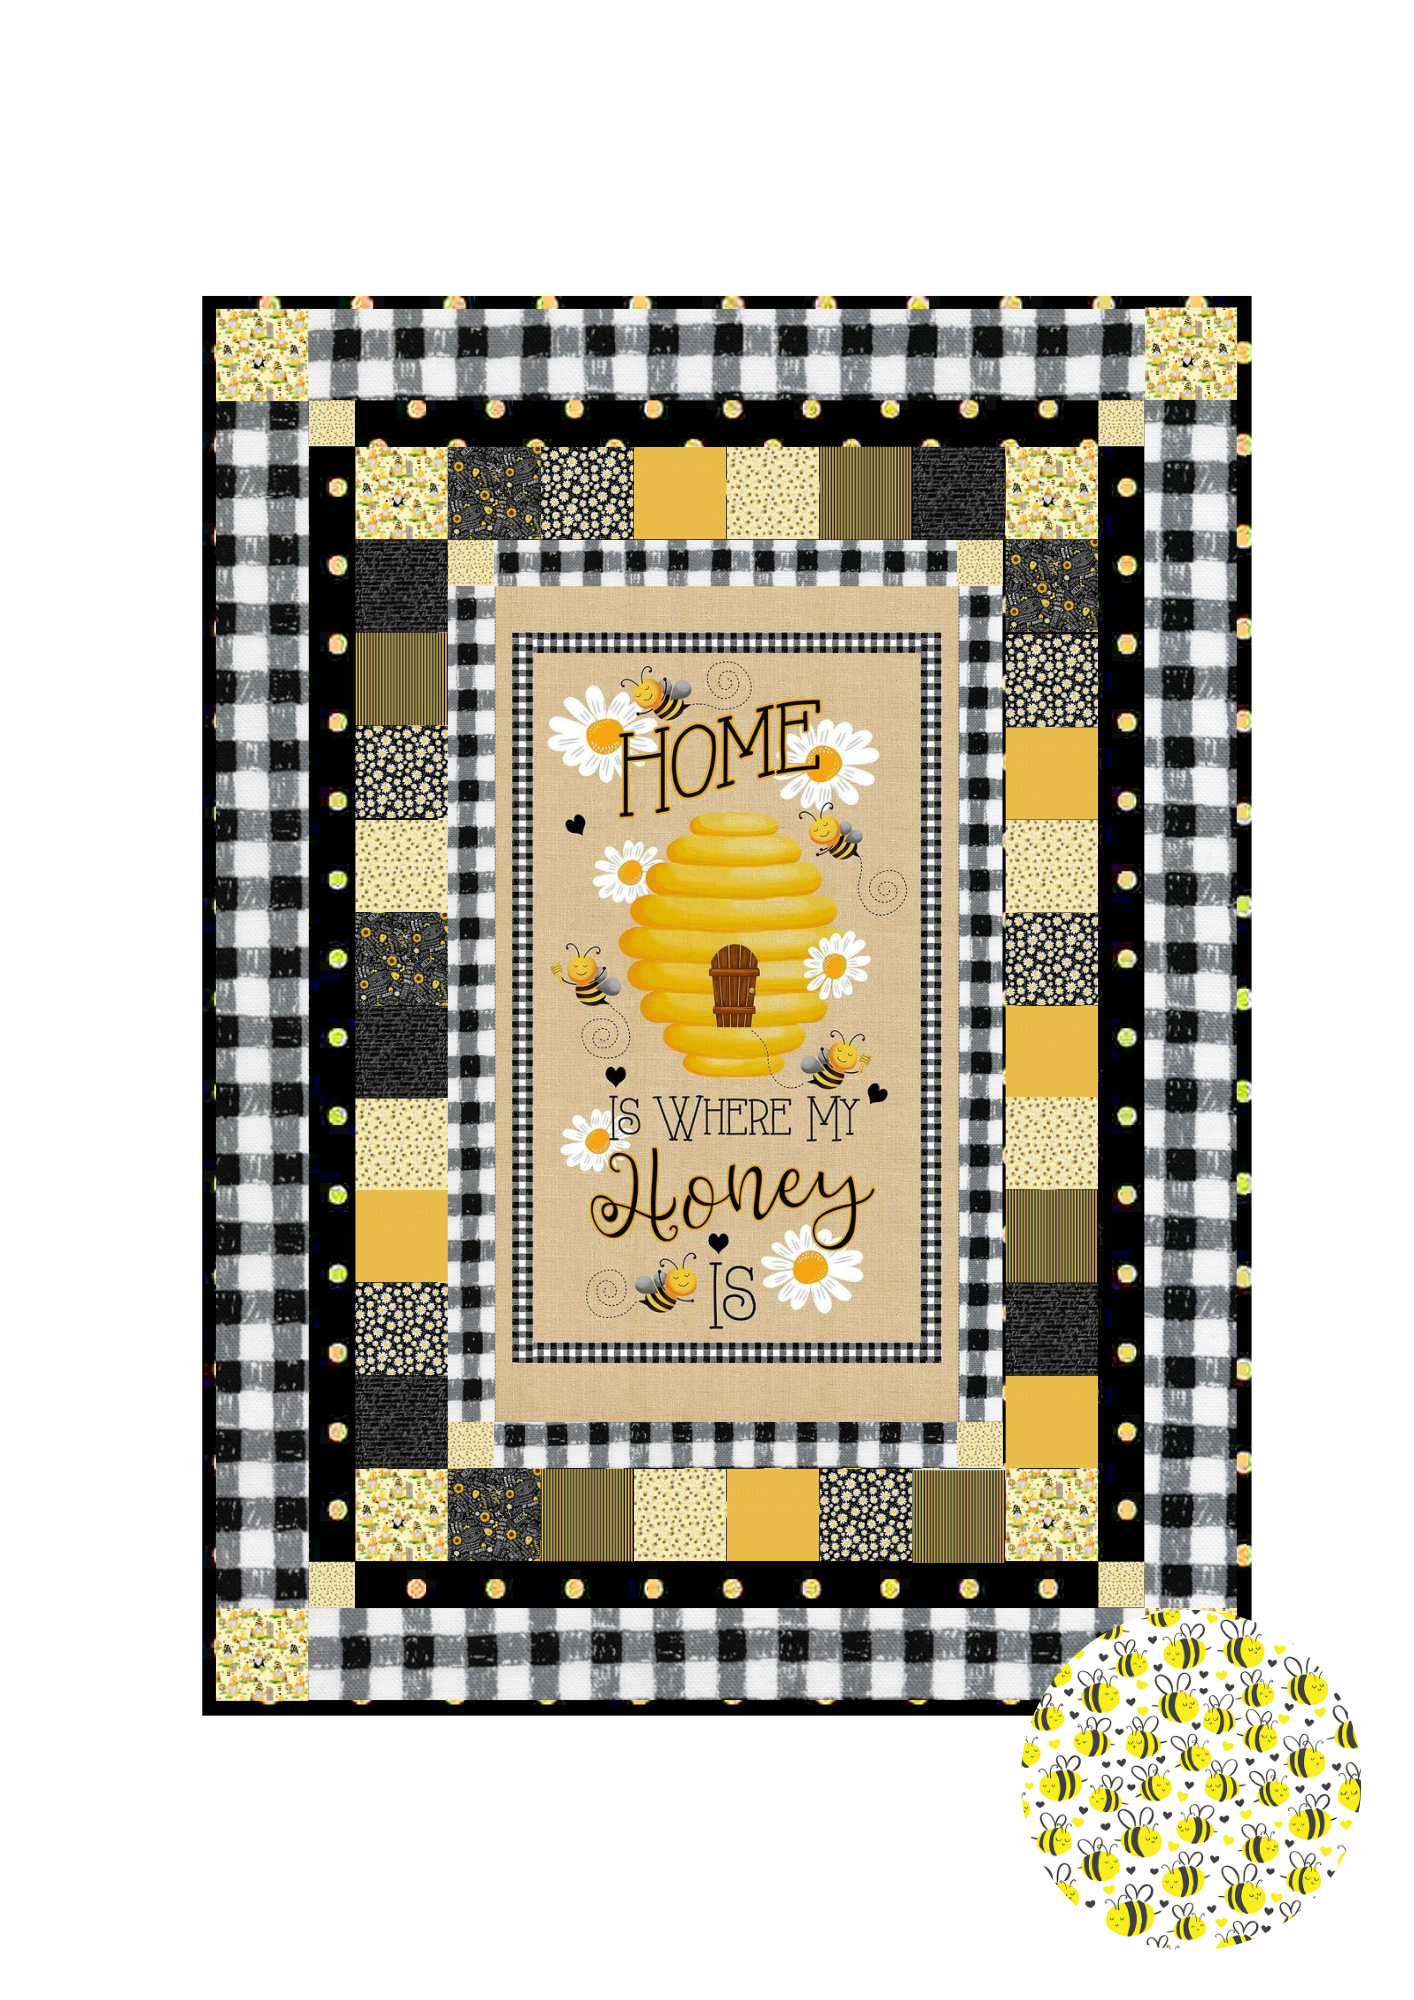 Timeless Treasures Quilt Kit Kit w/backing Plump Bees on White Beginner Bee Hive Quilt Kit Timeless Treasures Home Is Where My Honey Is DIY Panel Quilt